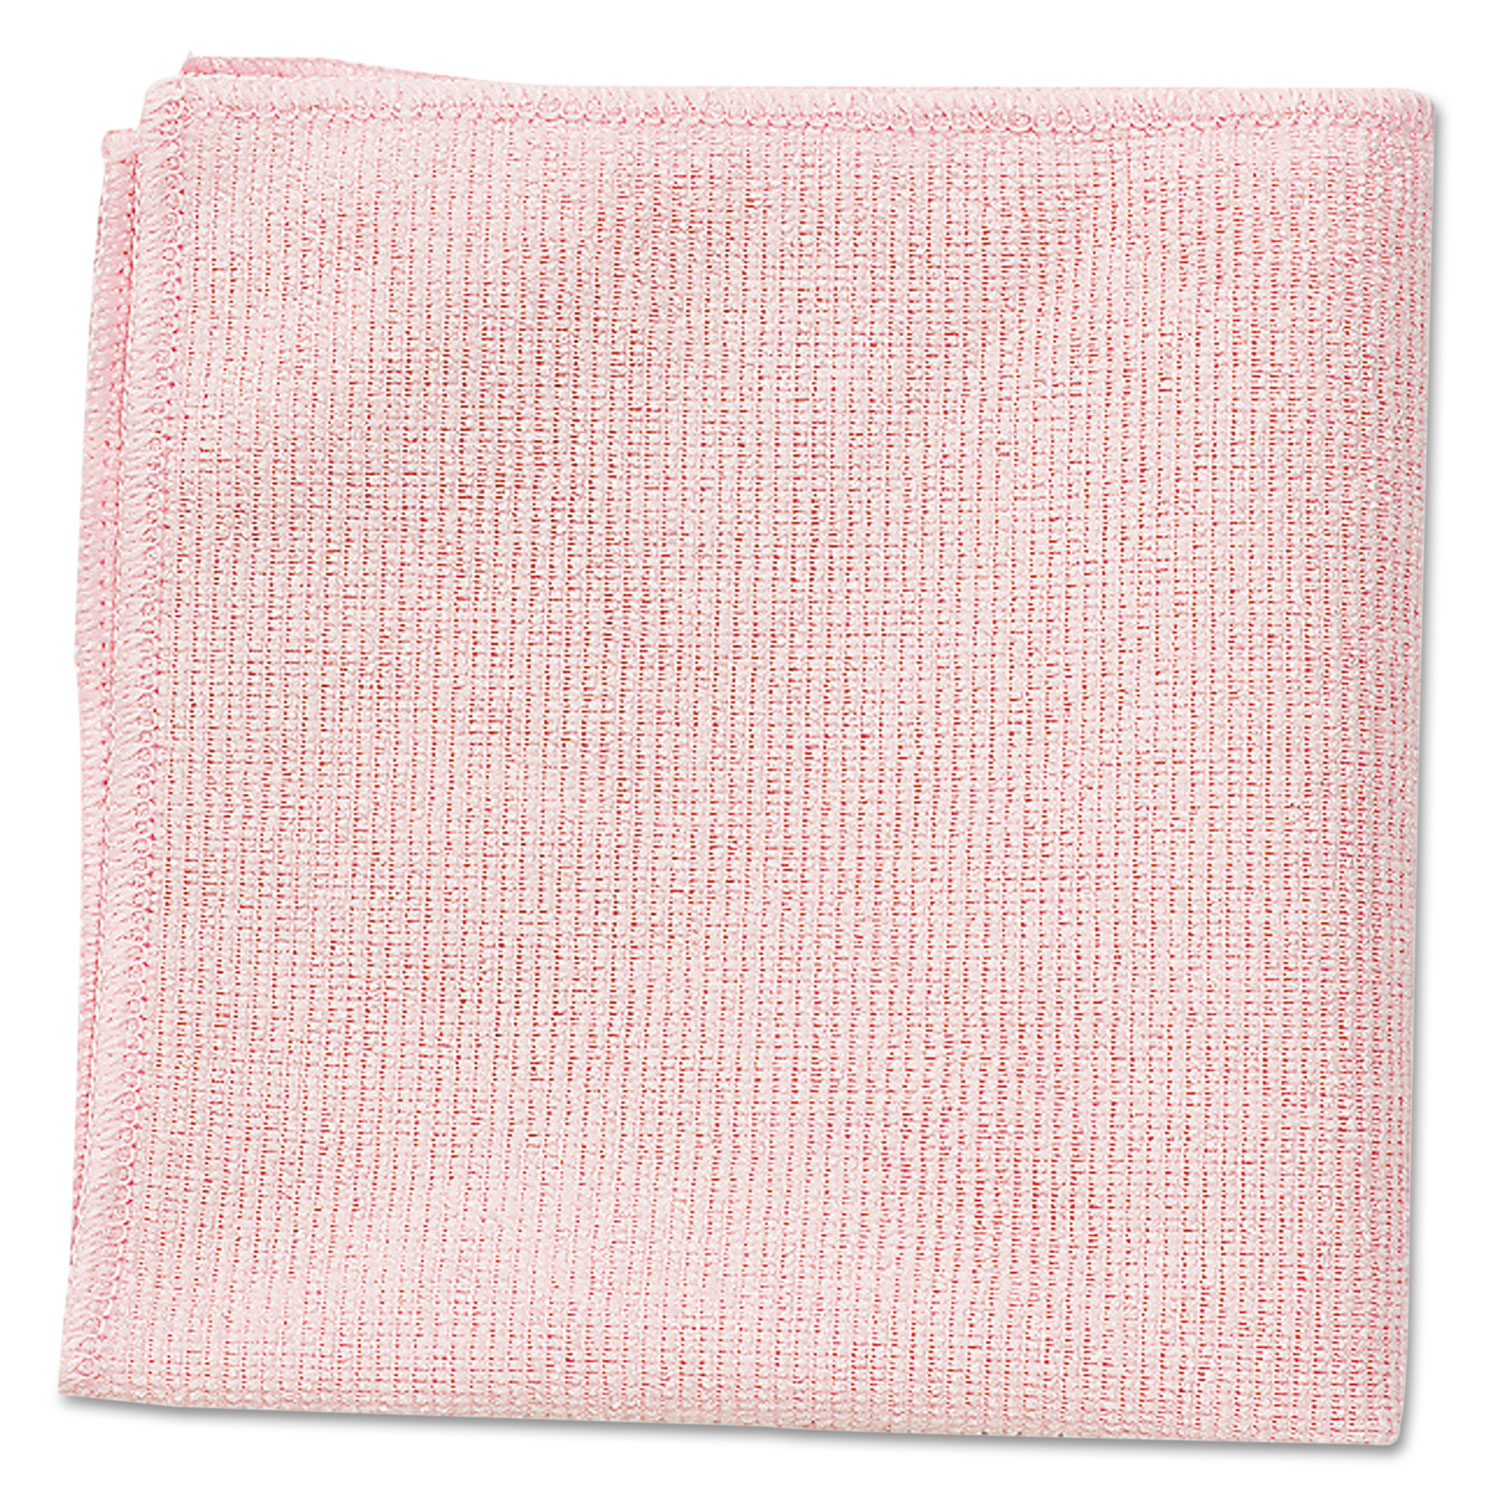  Rubbermaid Commercial 1820581 Microfiber Cleaning Cloths, 16 x 16, Pink, 24/Pack (RCP1820581) 